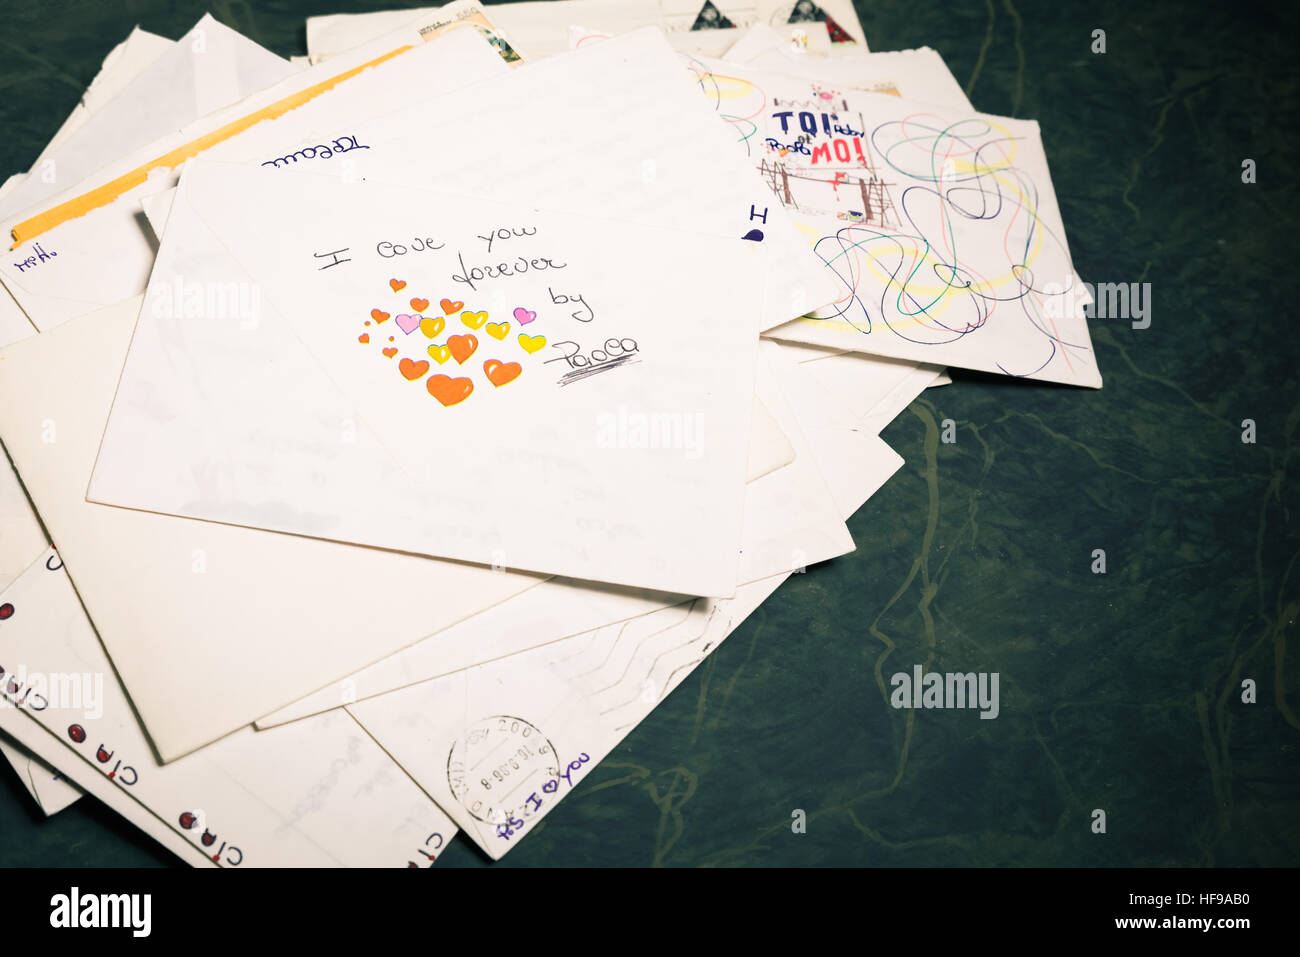 Big stack of mails, pile of papers, or heap of letters, above a letter saying 'I love you forever ...'. Stock Photo